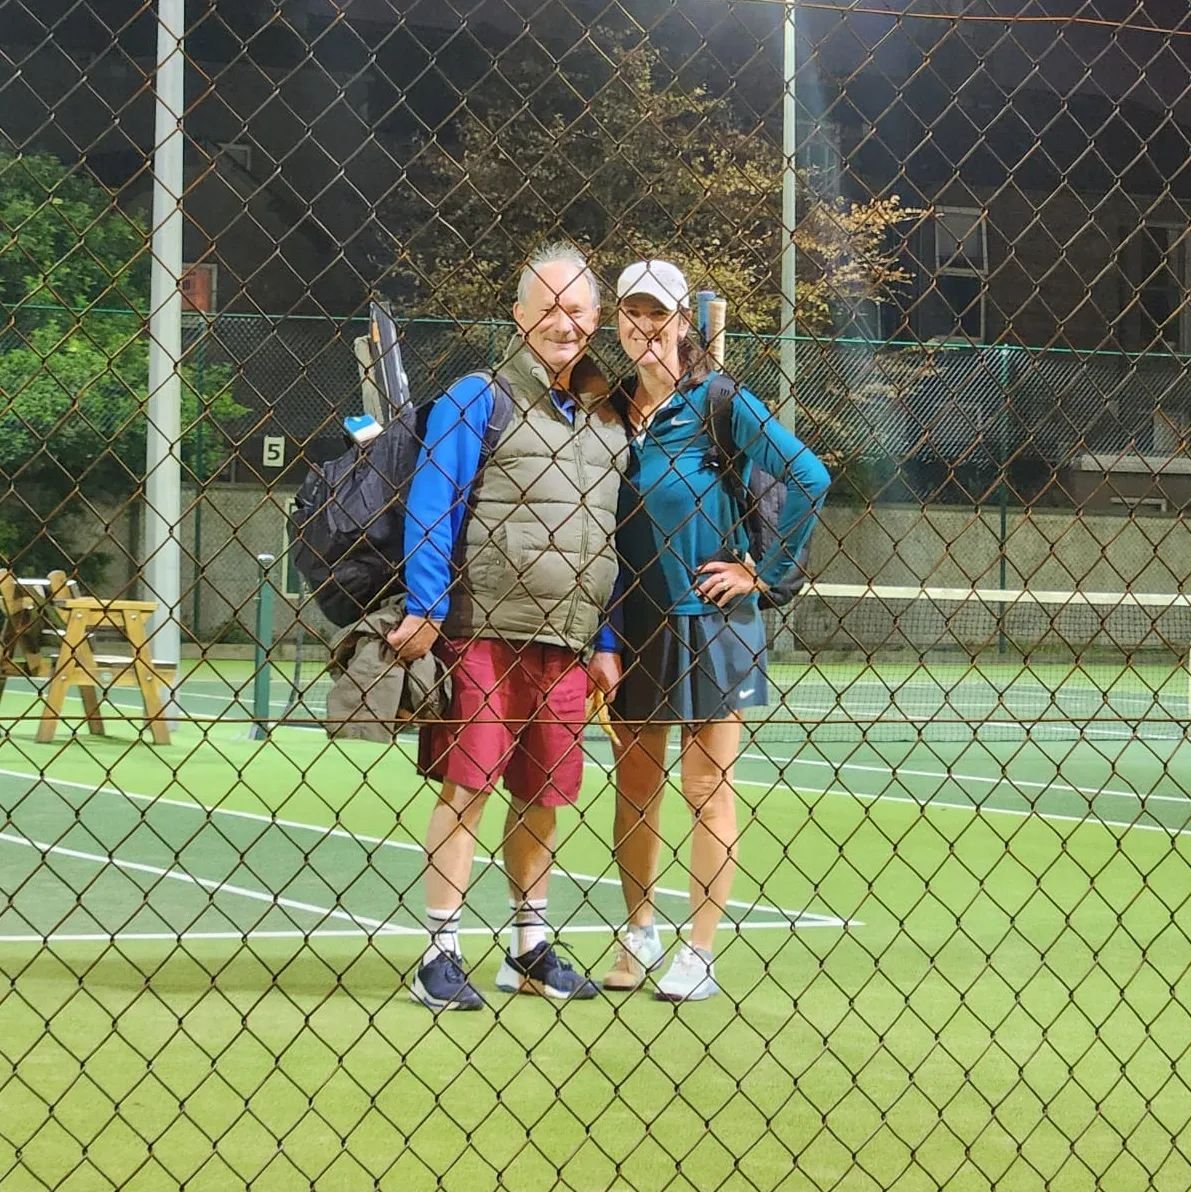 Eugene and Breege coming off court @lcctennis. Class 5 mixed doubles champions! 🙌 Thanks to coach Erick for the photo!